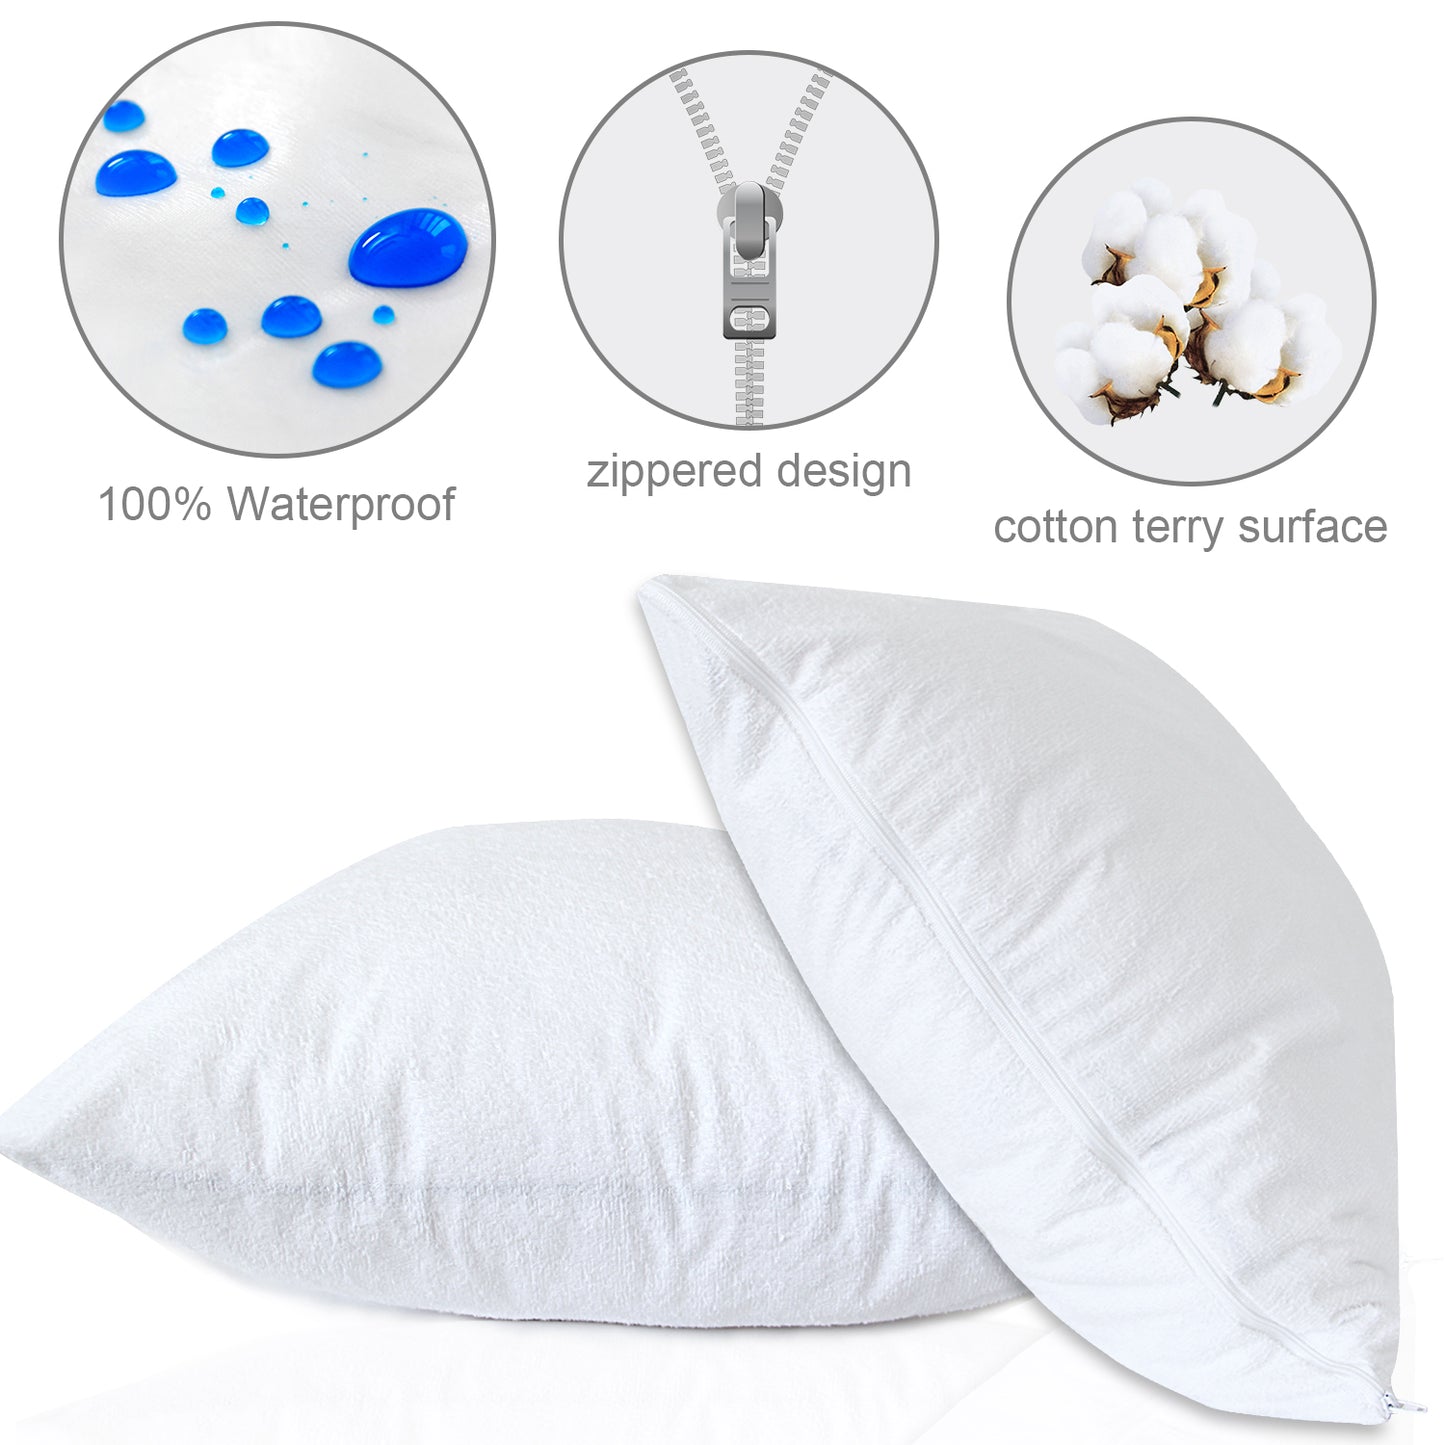 Waterproof Cotton Terry Pillow Protector 2 Pack